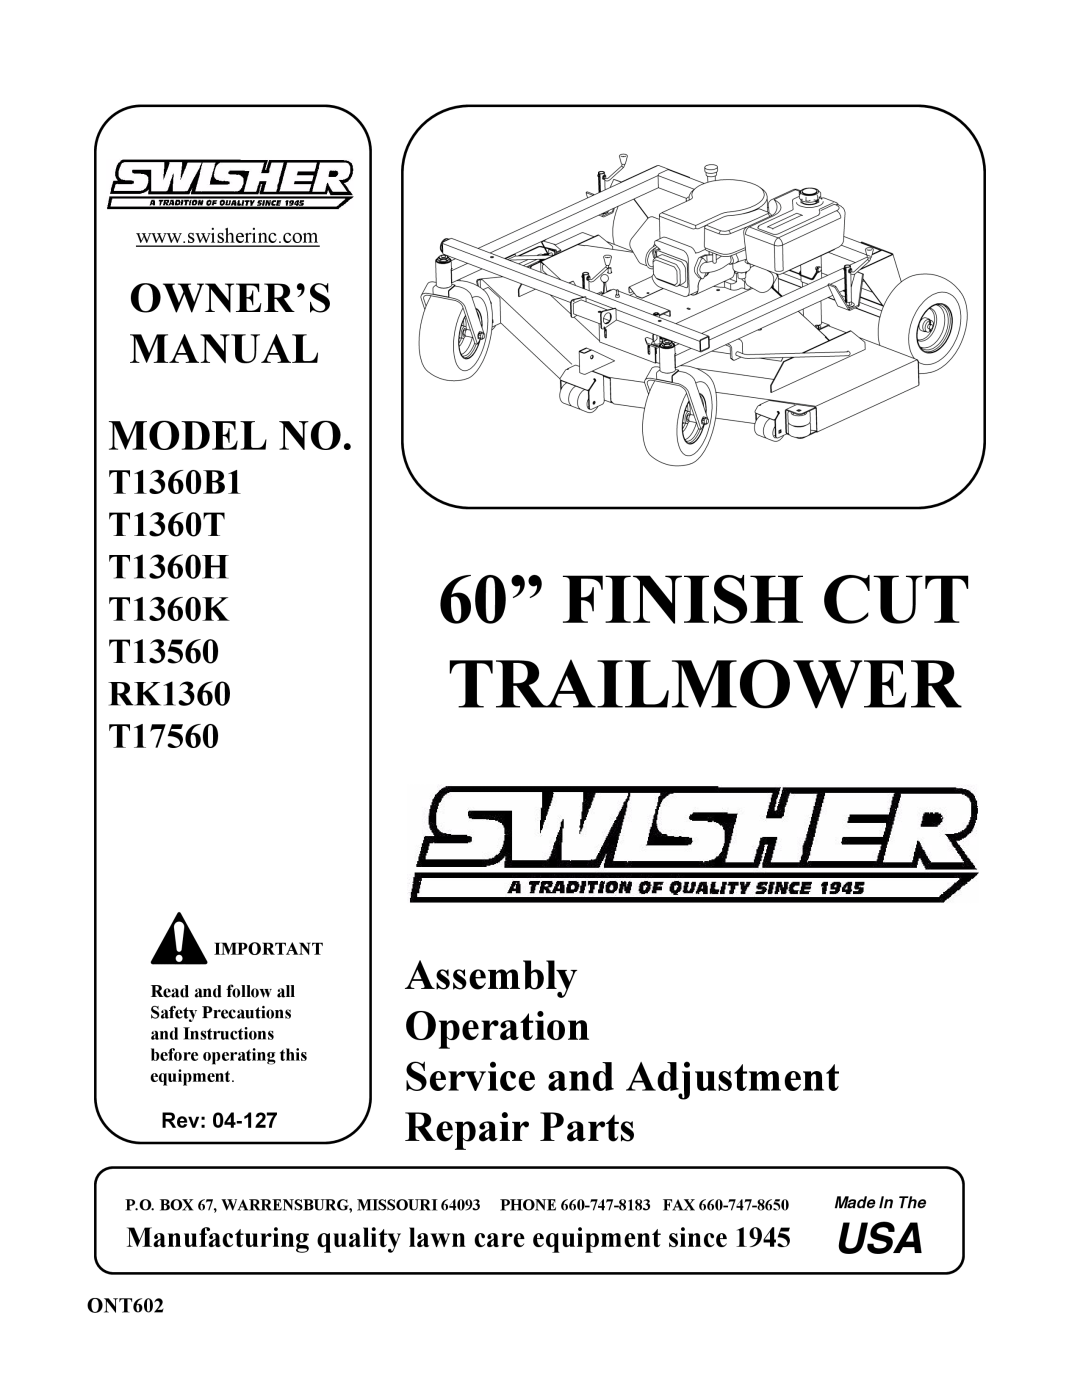 Swisher T17560 owner manual Owner’S Manual Model No, Assembly Operation Service and Adjustment Repair Parts, Made In The 